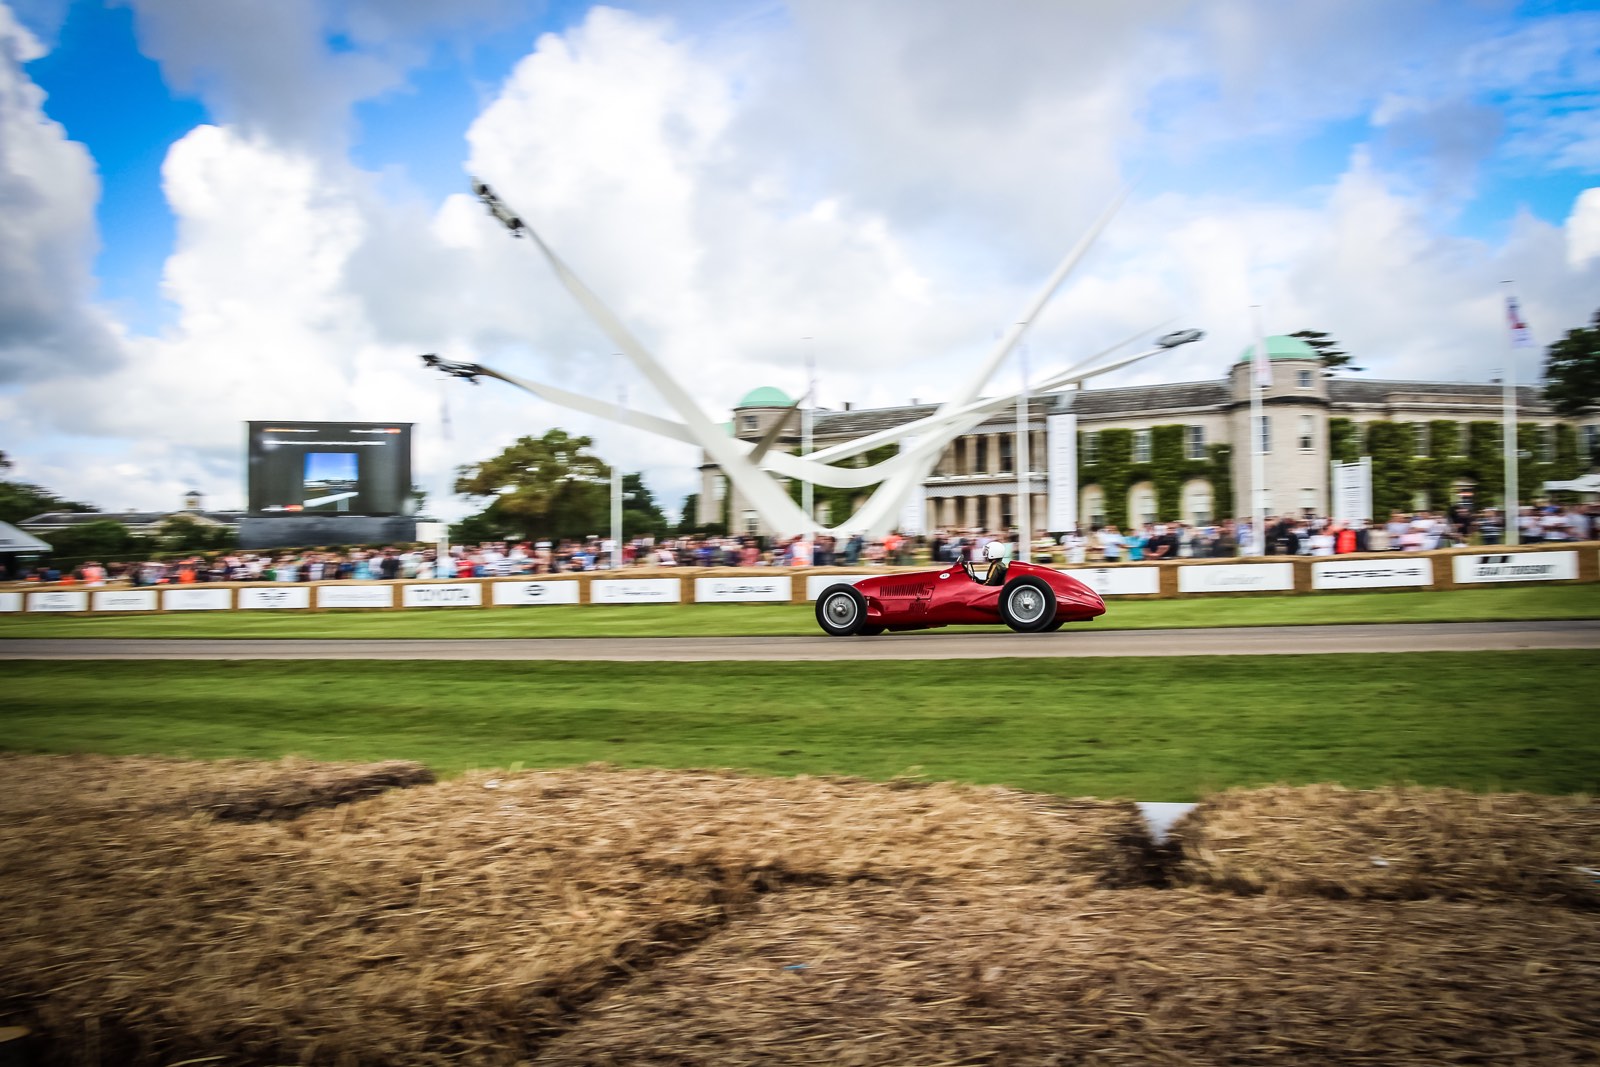 Vintage Maserati at the Goodwood Festival of Speed 2016